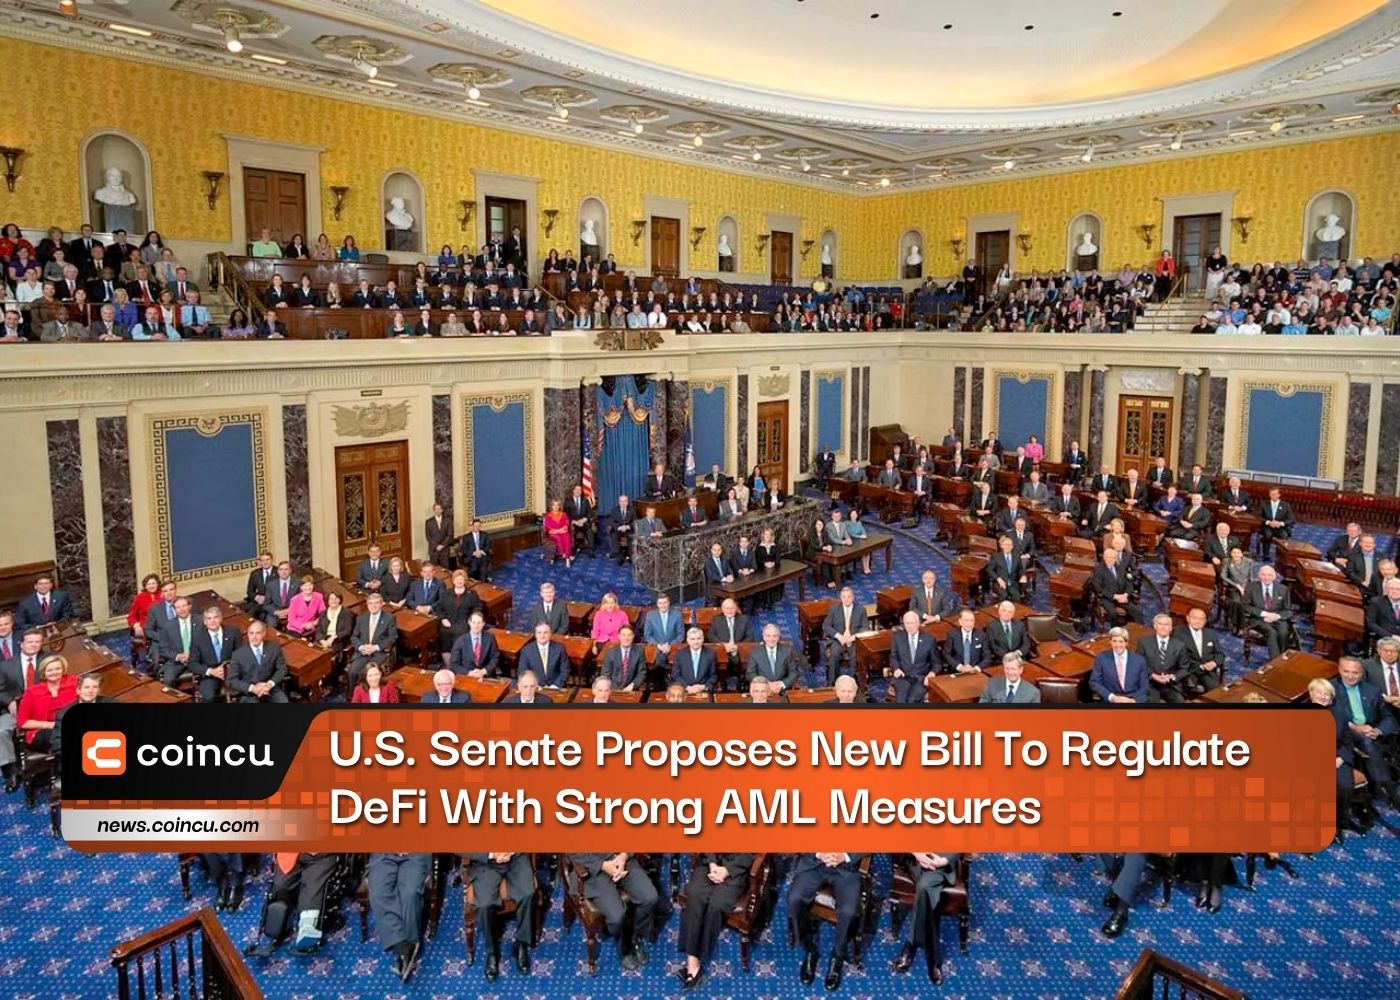 U.S. Senate Proposes New Bill To Regulate DeFi With Strong AML Measures